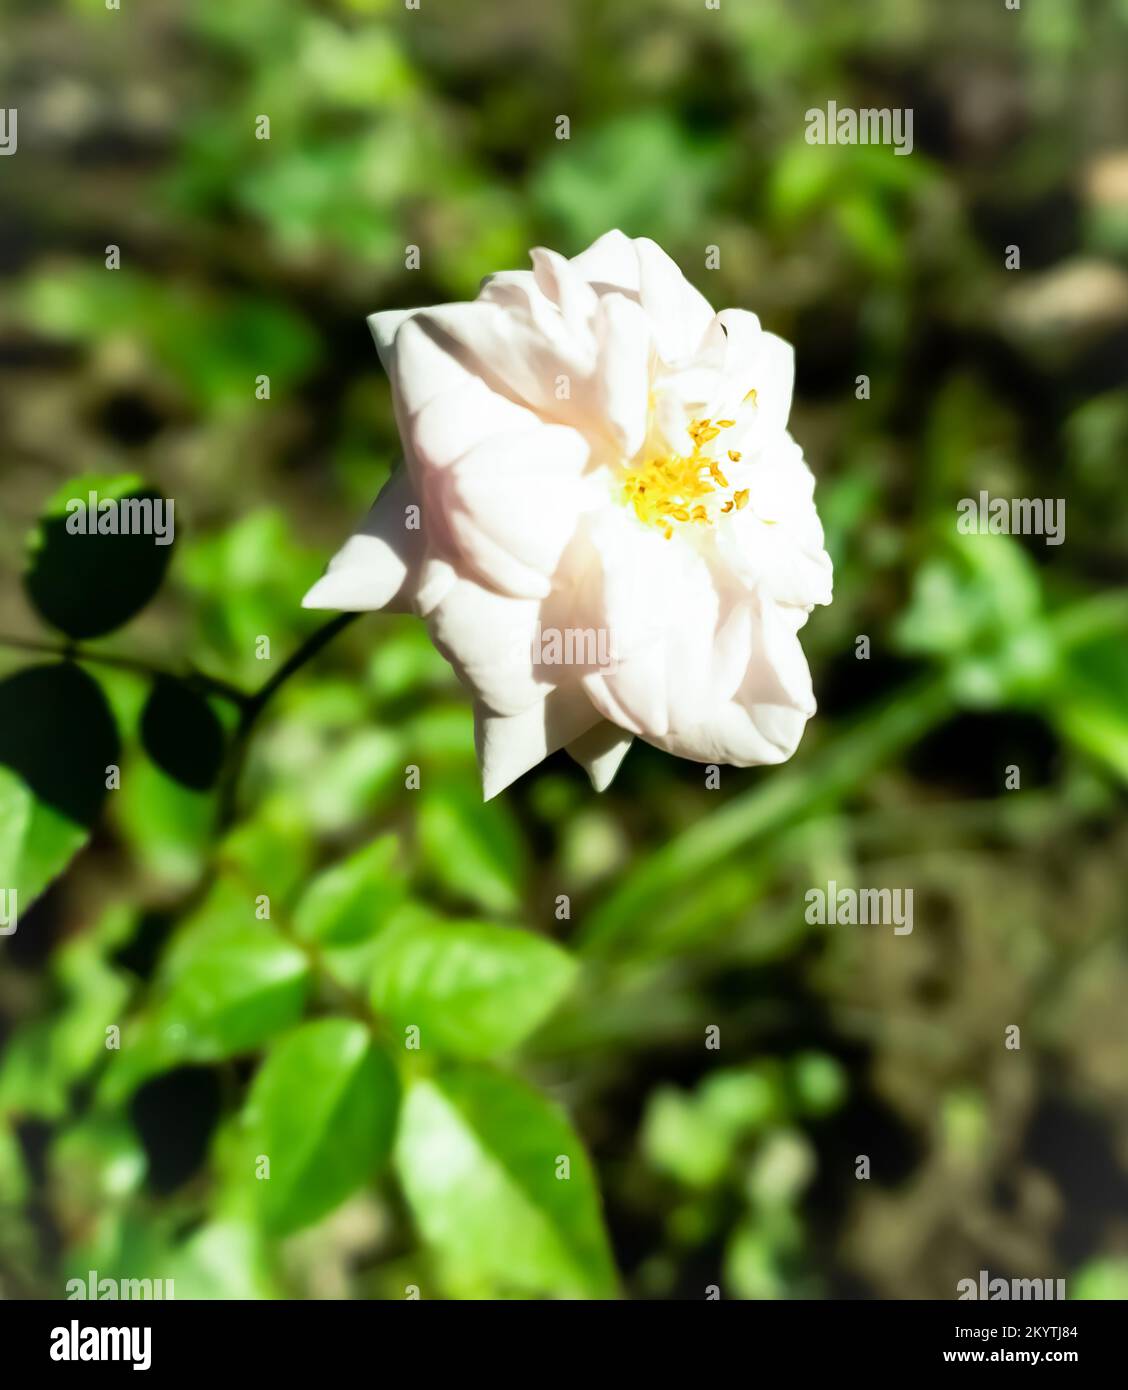 https://c8.alamy.com/comp/2KYTJ84/white-rose-in-full-bloom-in-a-summer-garden-with-blurred-green-leaves-in-the-background-2KYTJ84.jpg